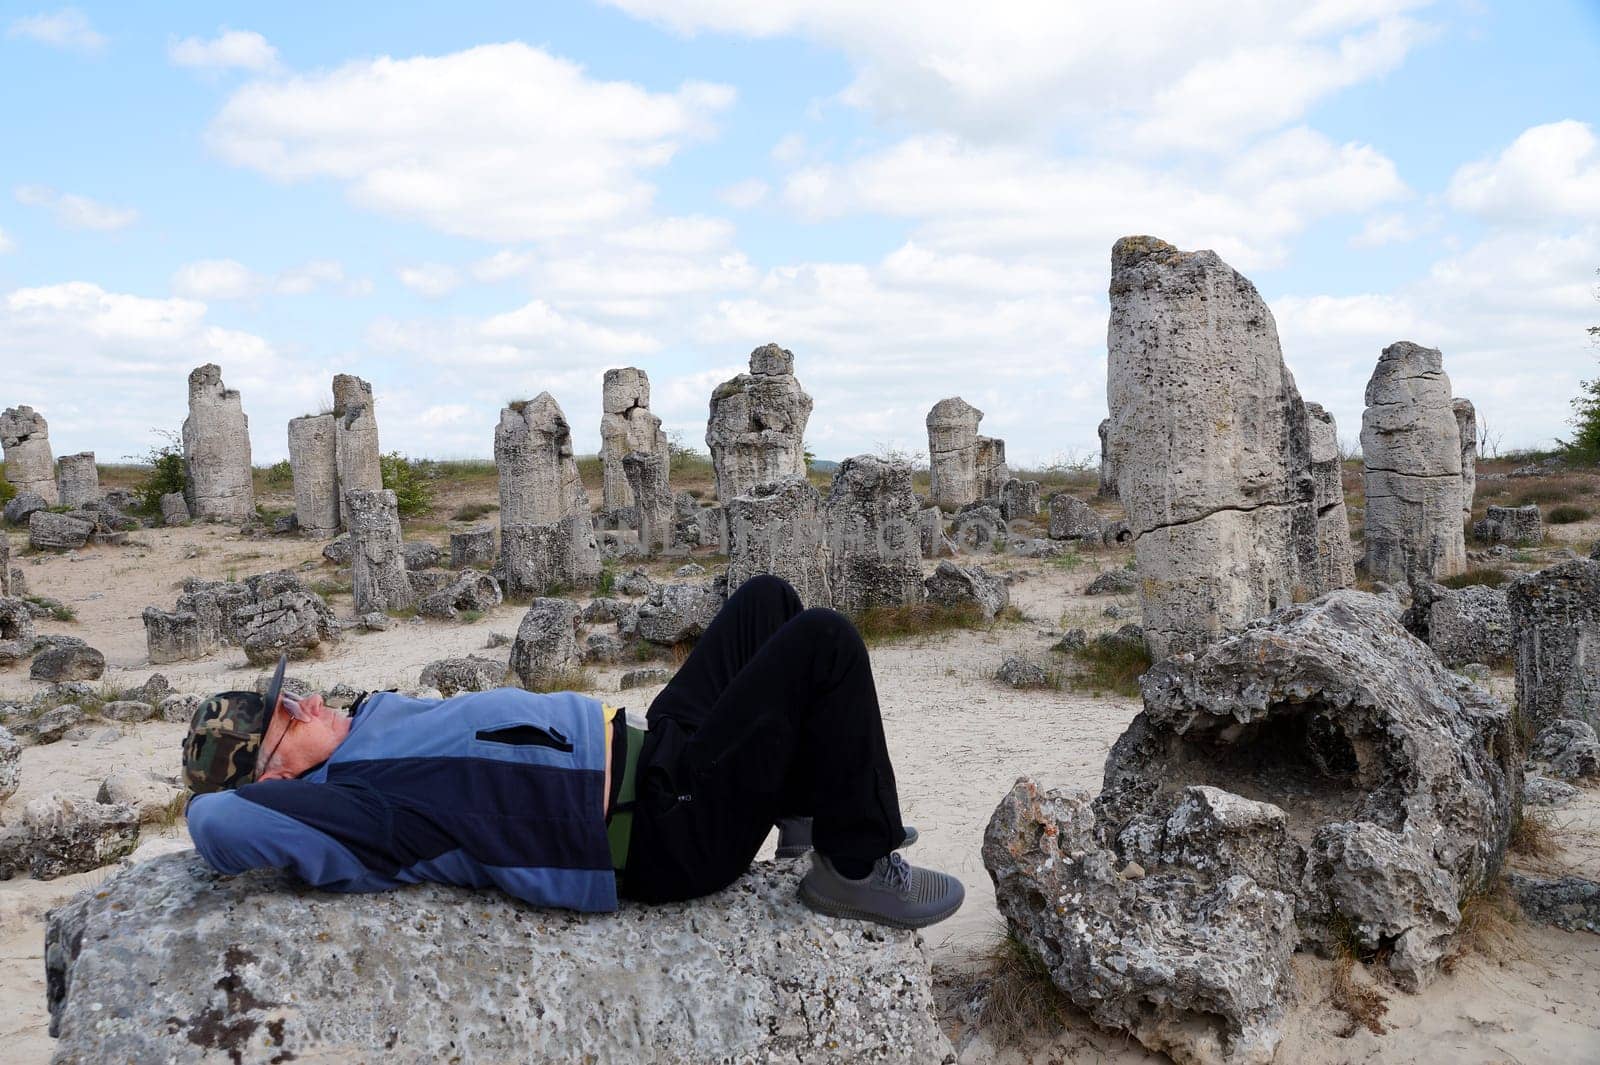 a lonely tourist rests on a stone in a historical open-air museum among ancient stone pillars by Annado